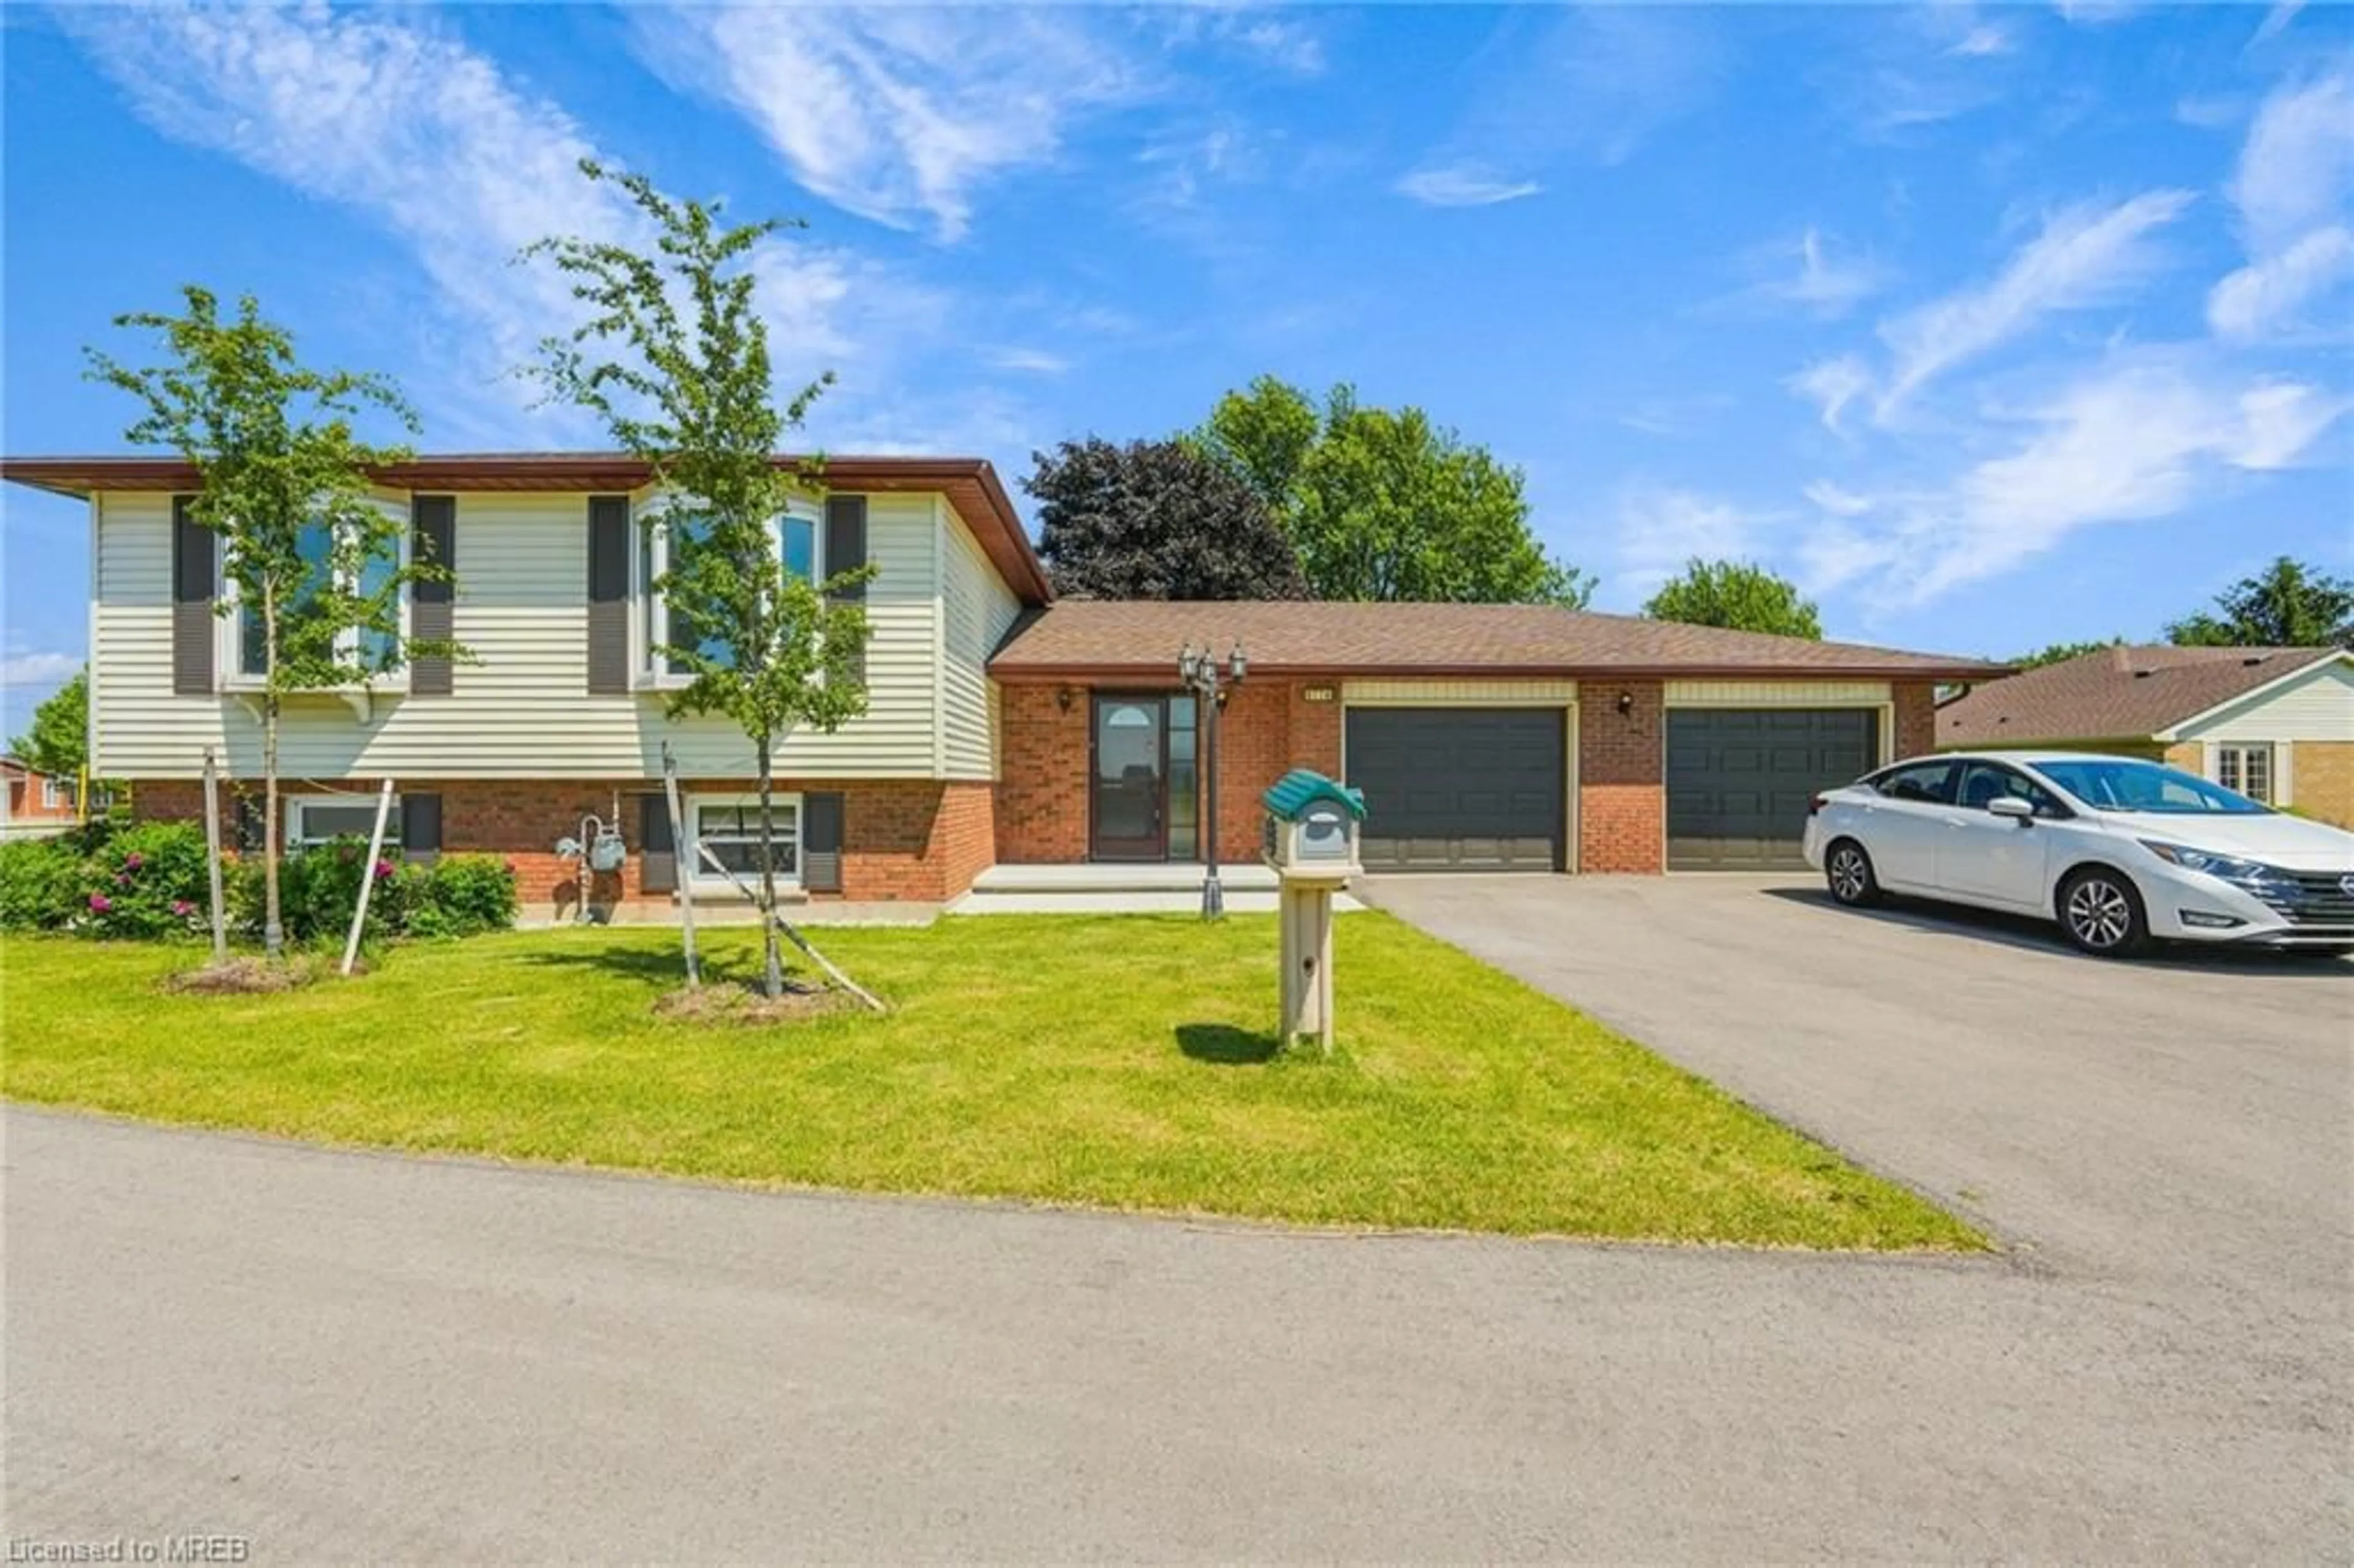 Frontside or backside of a home for 8776 Centennial Rd, St. Thomas Ontario N5P 3S6